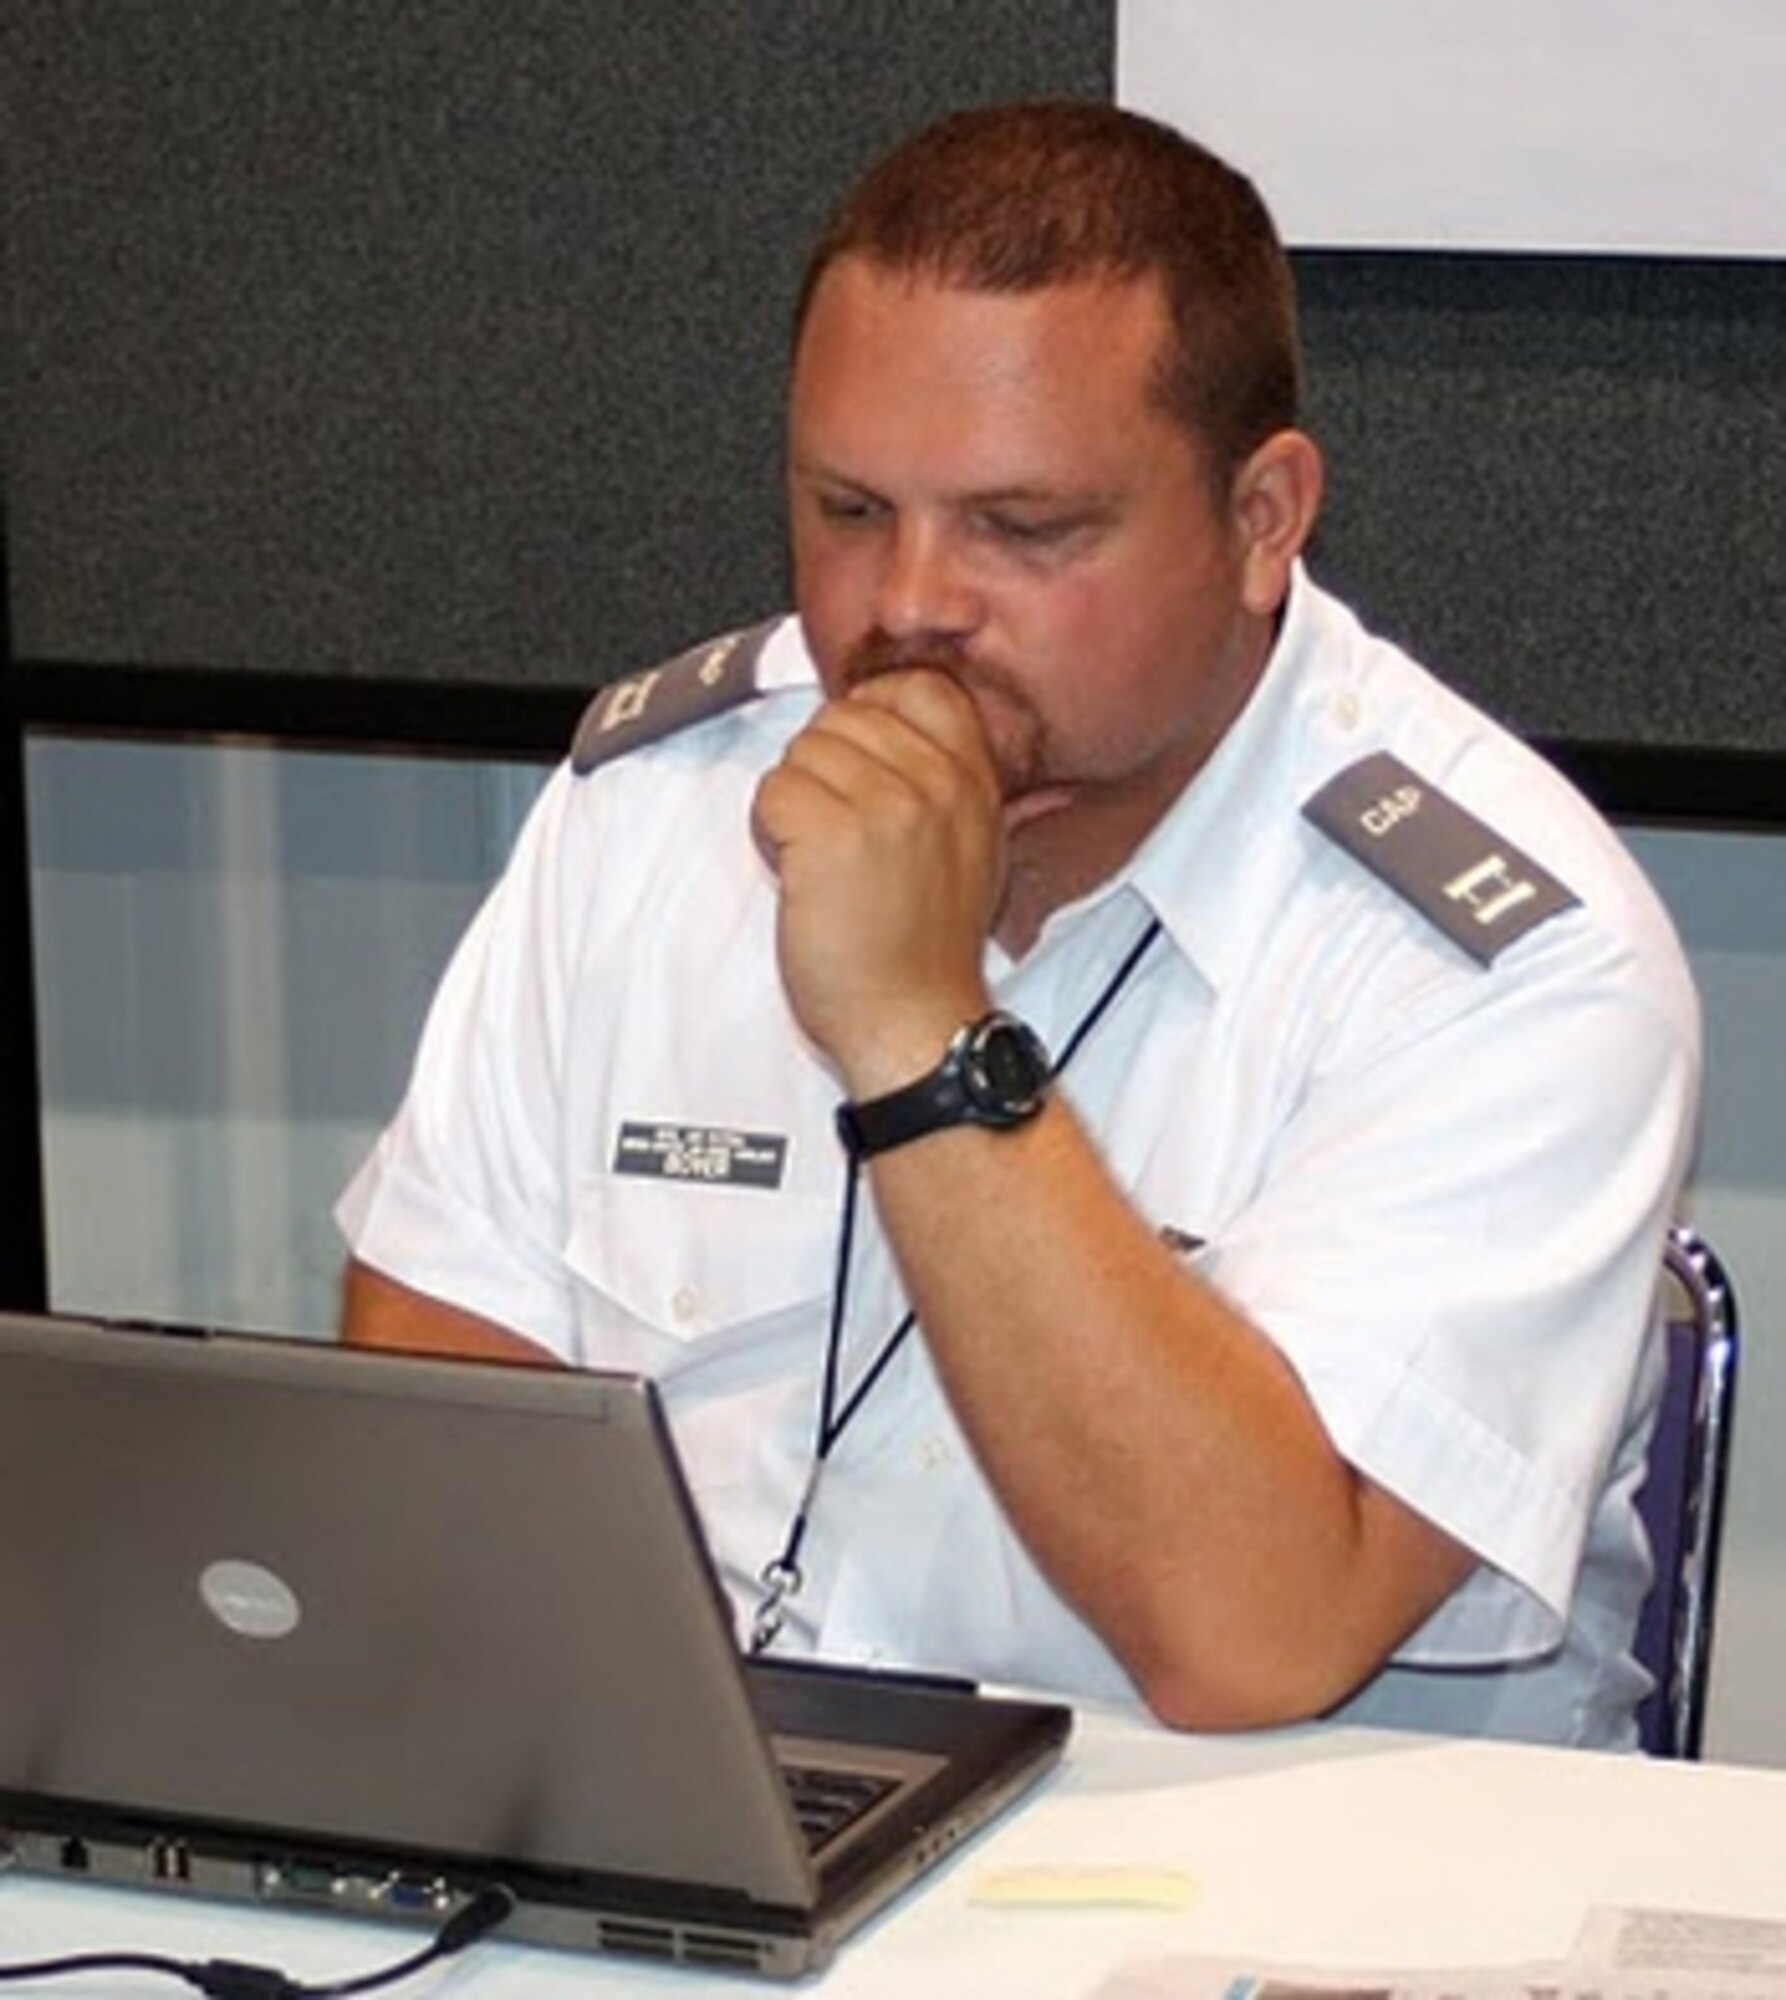 Capt. Ande Boyer, a CAP imaging expert and the Alabama Wing’s director of emergency services, reviews digital data collected by aircrews flying along the Gulf Coast shoreline. Photos by Capt. Phil Norris